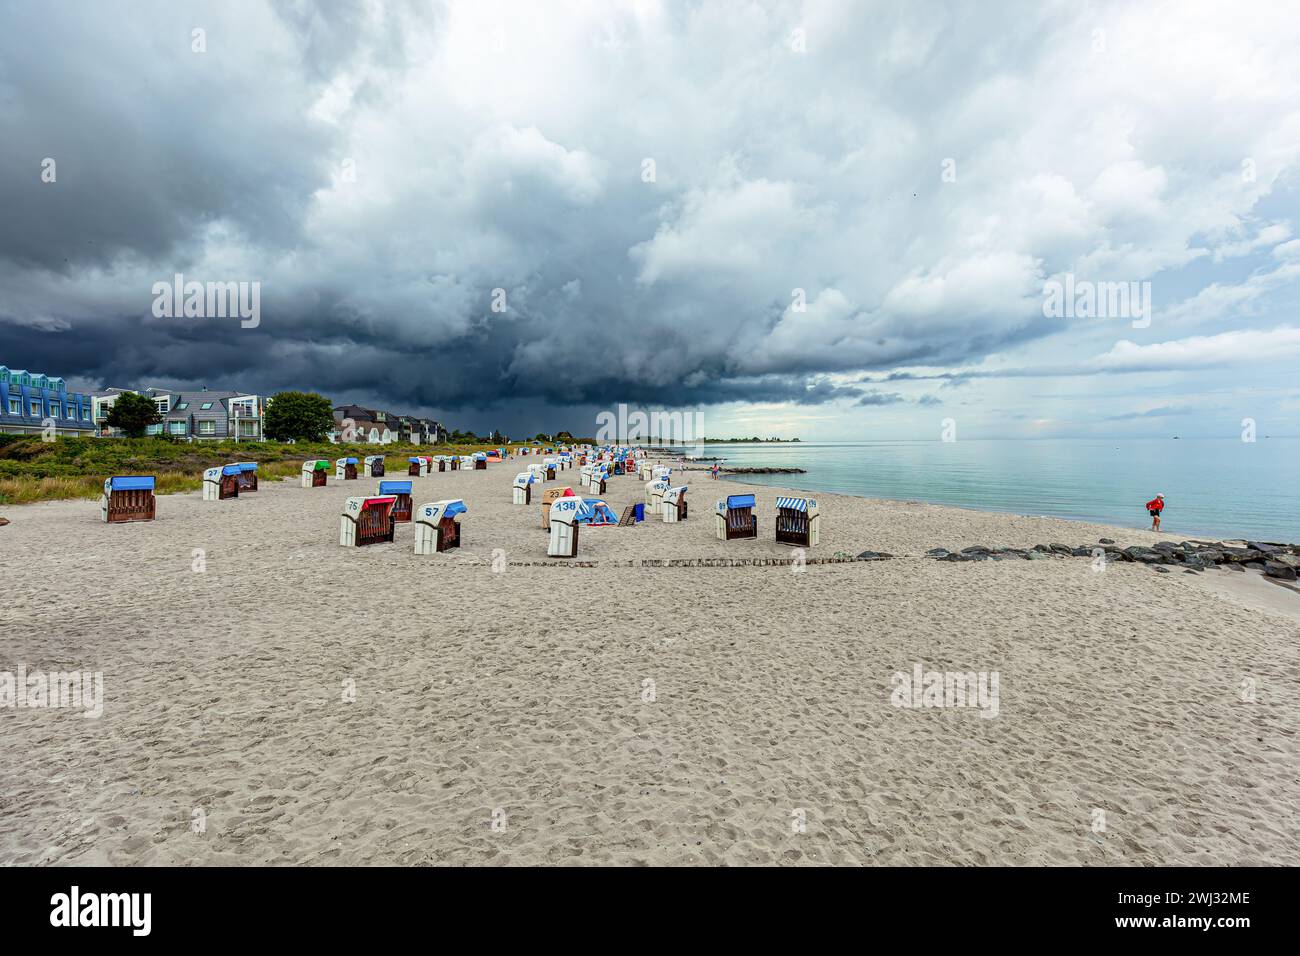 Clouds over the beach. storm clouds over the sea. Coast Landscape in Germany. Baltic sea with dramat Stock Photo